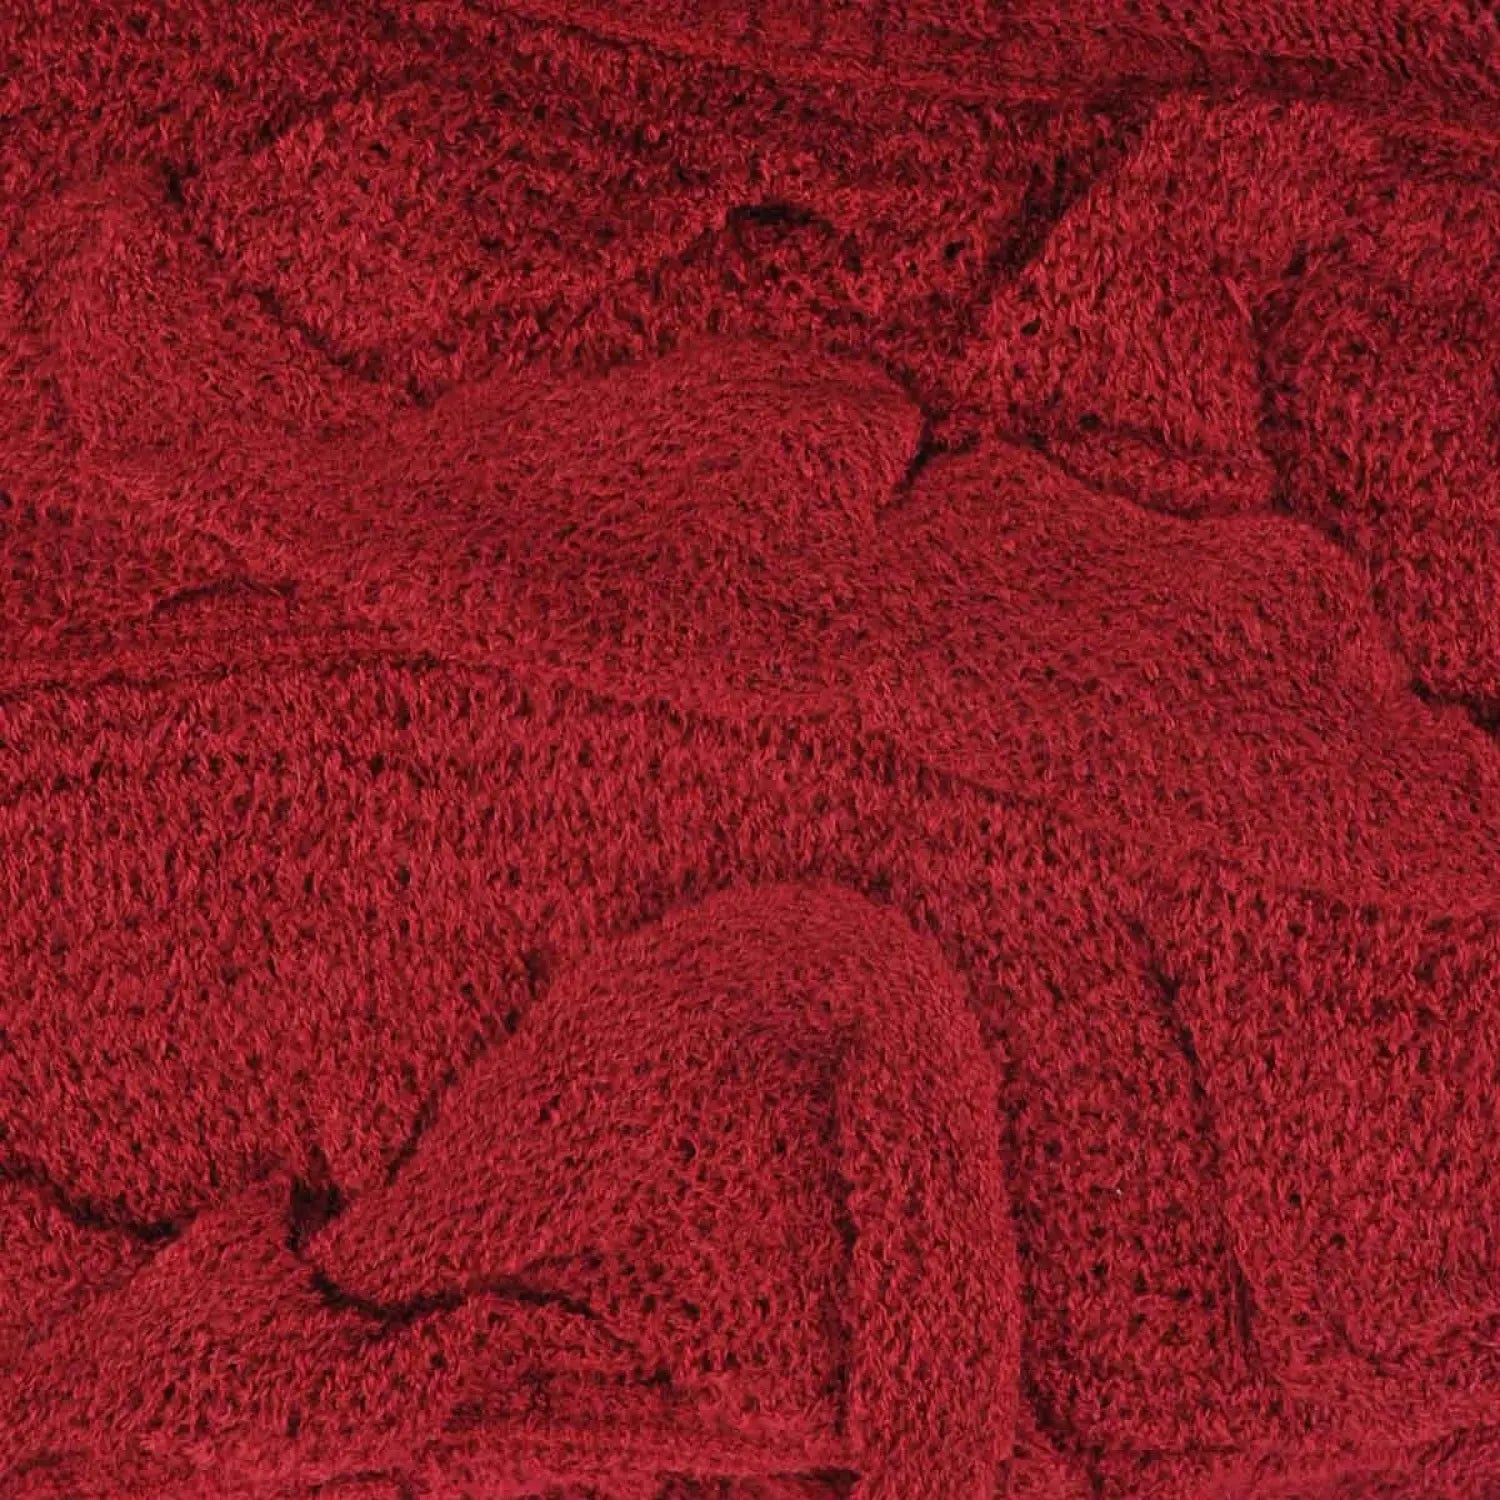 Red lightweight knitted ruffled scarf for Autumn/Winter.